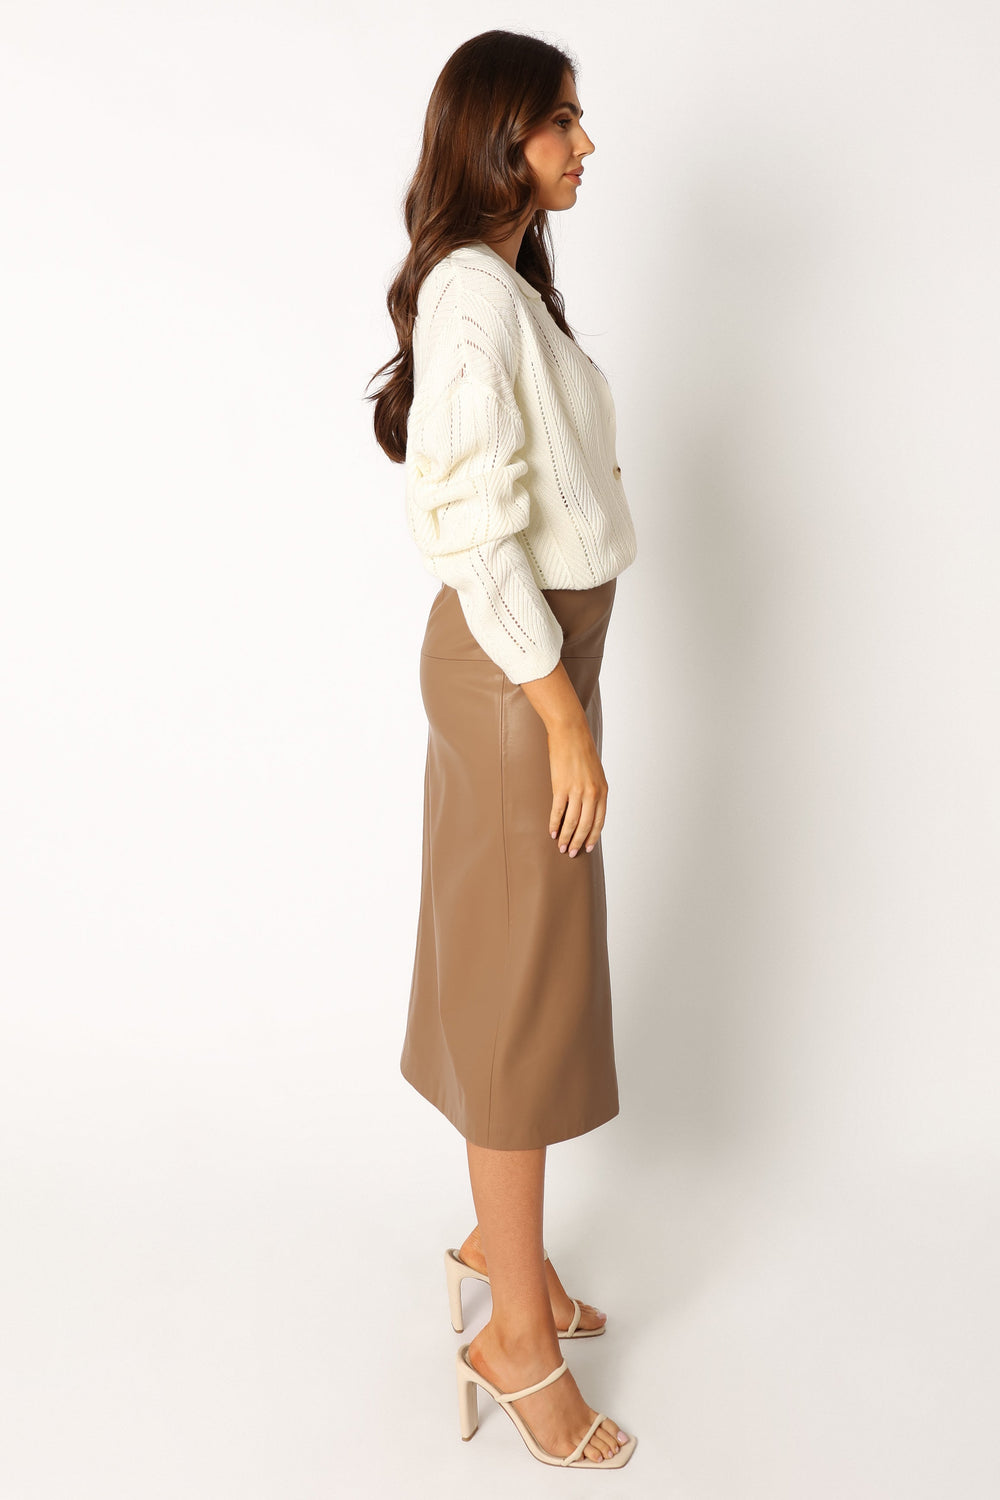 Petal and Pup USA BOTTOMS Miller Faux Leather Midi Skirt - Tan